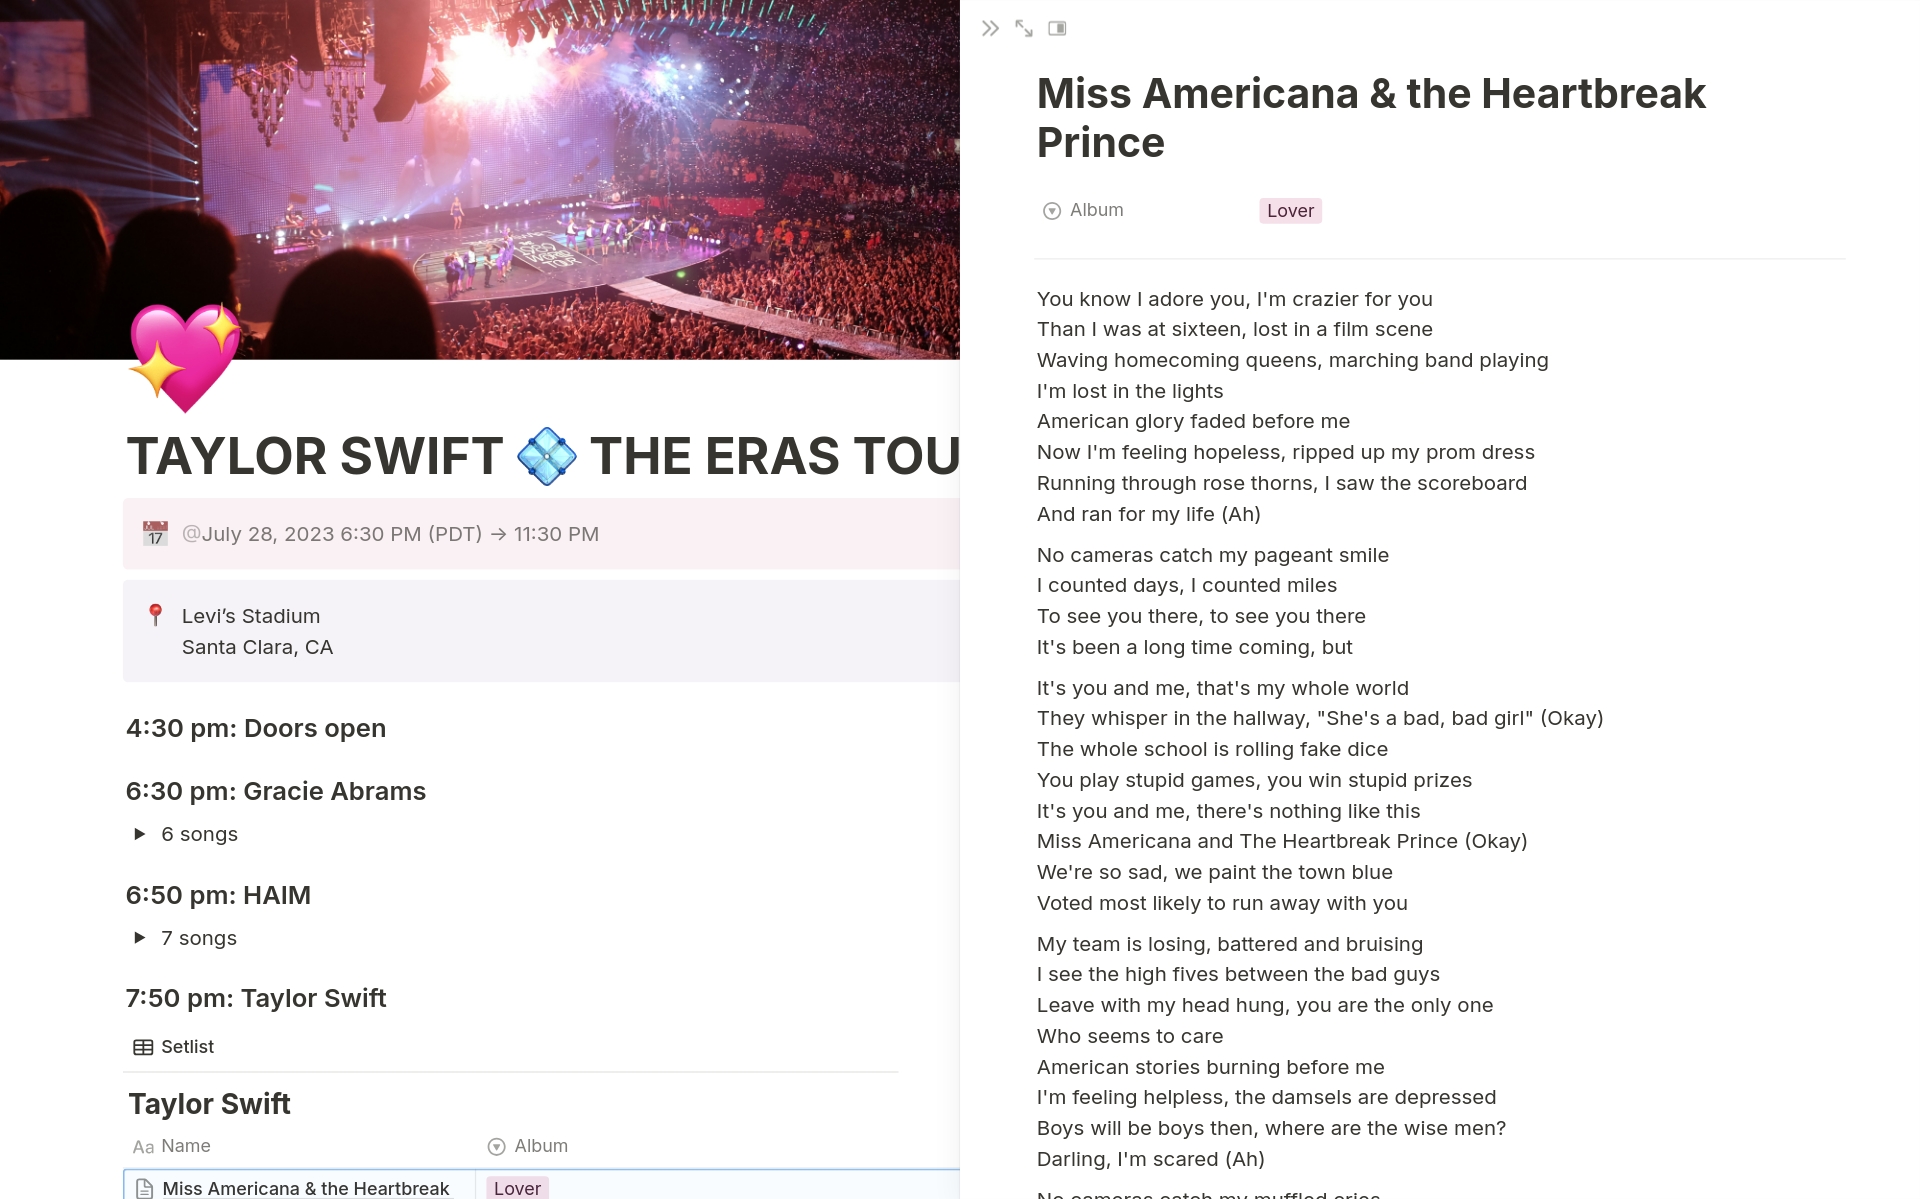 Keep track of what songs are coming up next for your next concert, complete with lyrics for each song generated by Notion AI. This template comes with the setlist for Taylor Swift Eras tour, but can be modified for any concert!